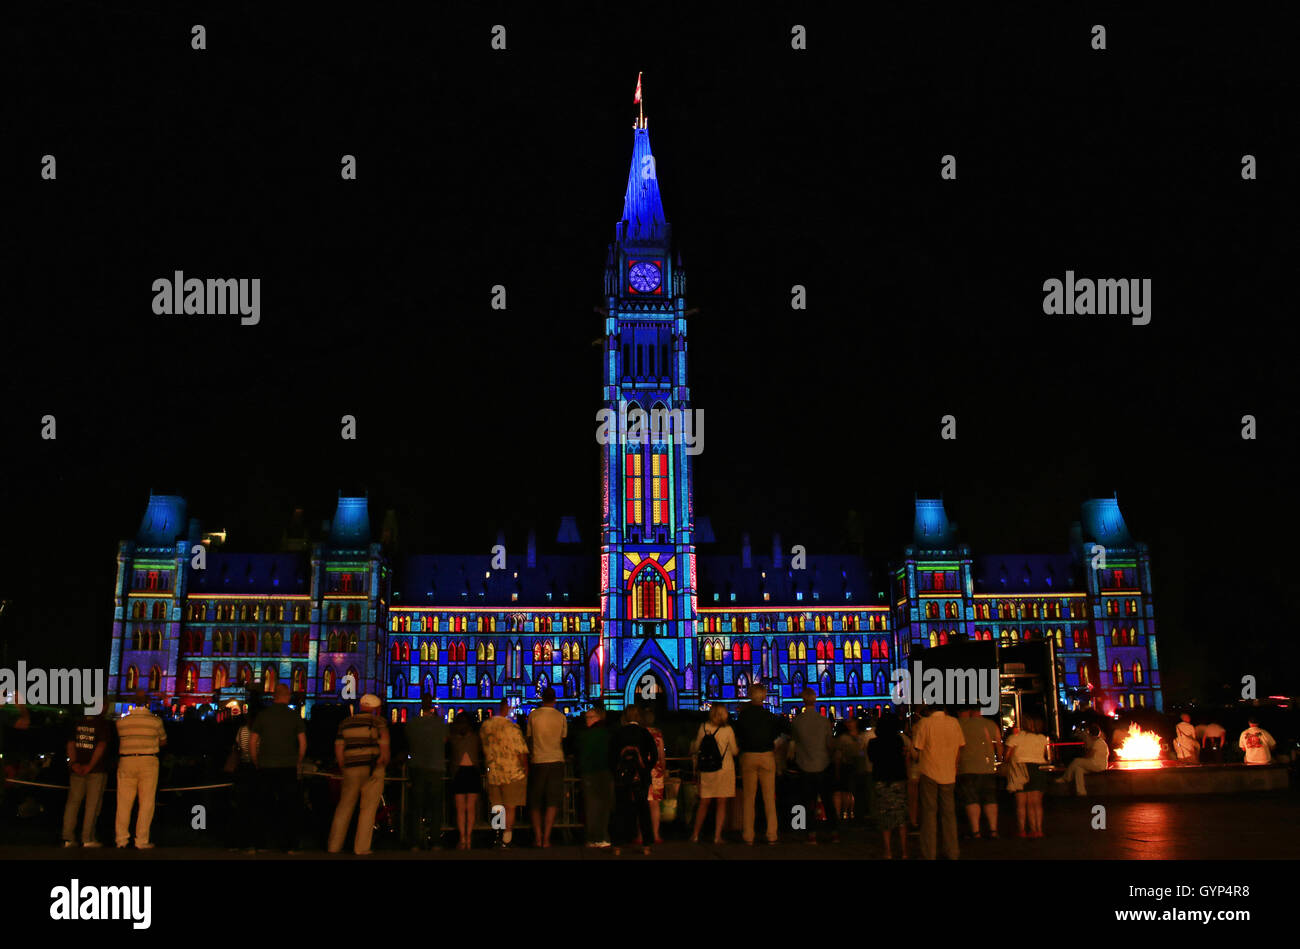 People watching Northern Lights, an illuminated light show sponsored by Government of Canada and Manulife on Parliament Hill, Ot Stock Photo